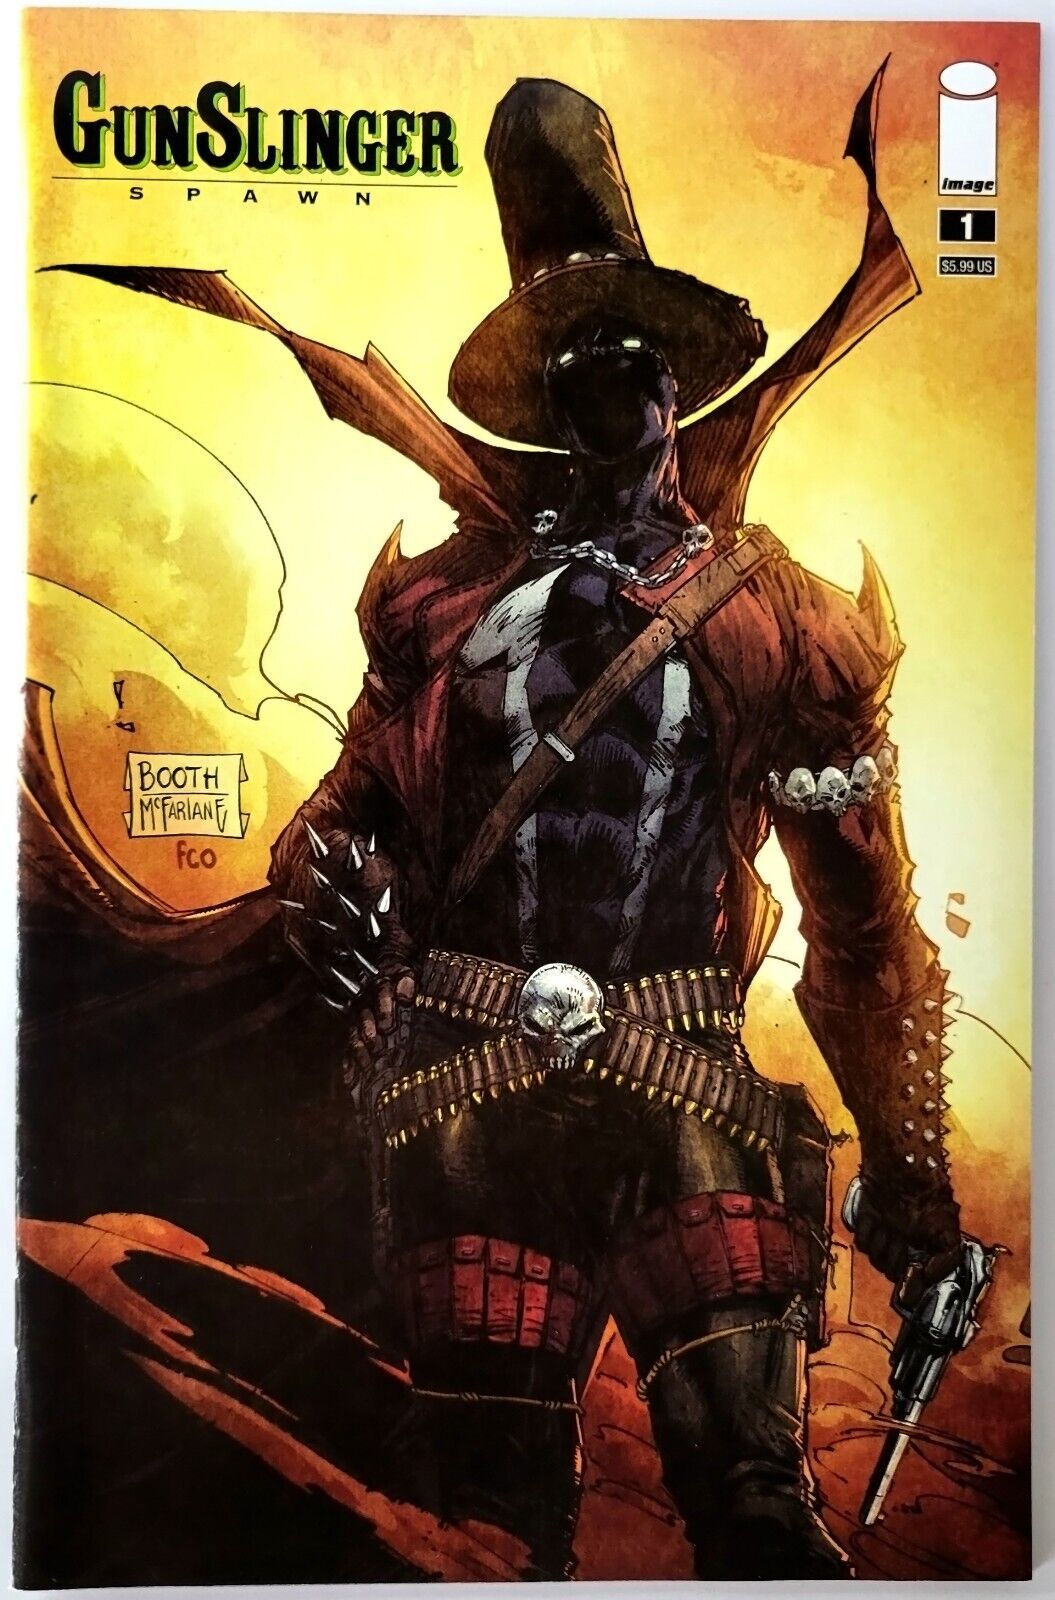 Gunslinger Spawn #1 Wrap-around Cover (2021) Premiere Issue of 2nd Spawn Title